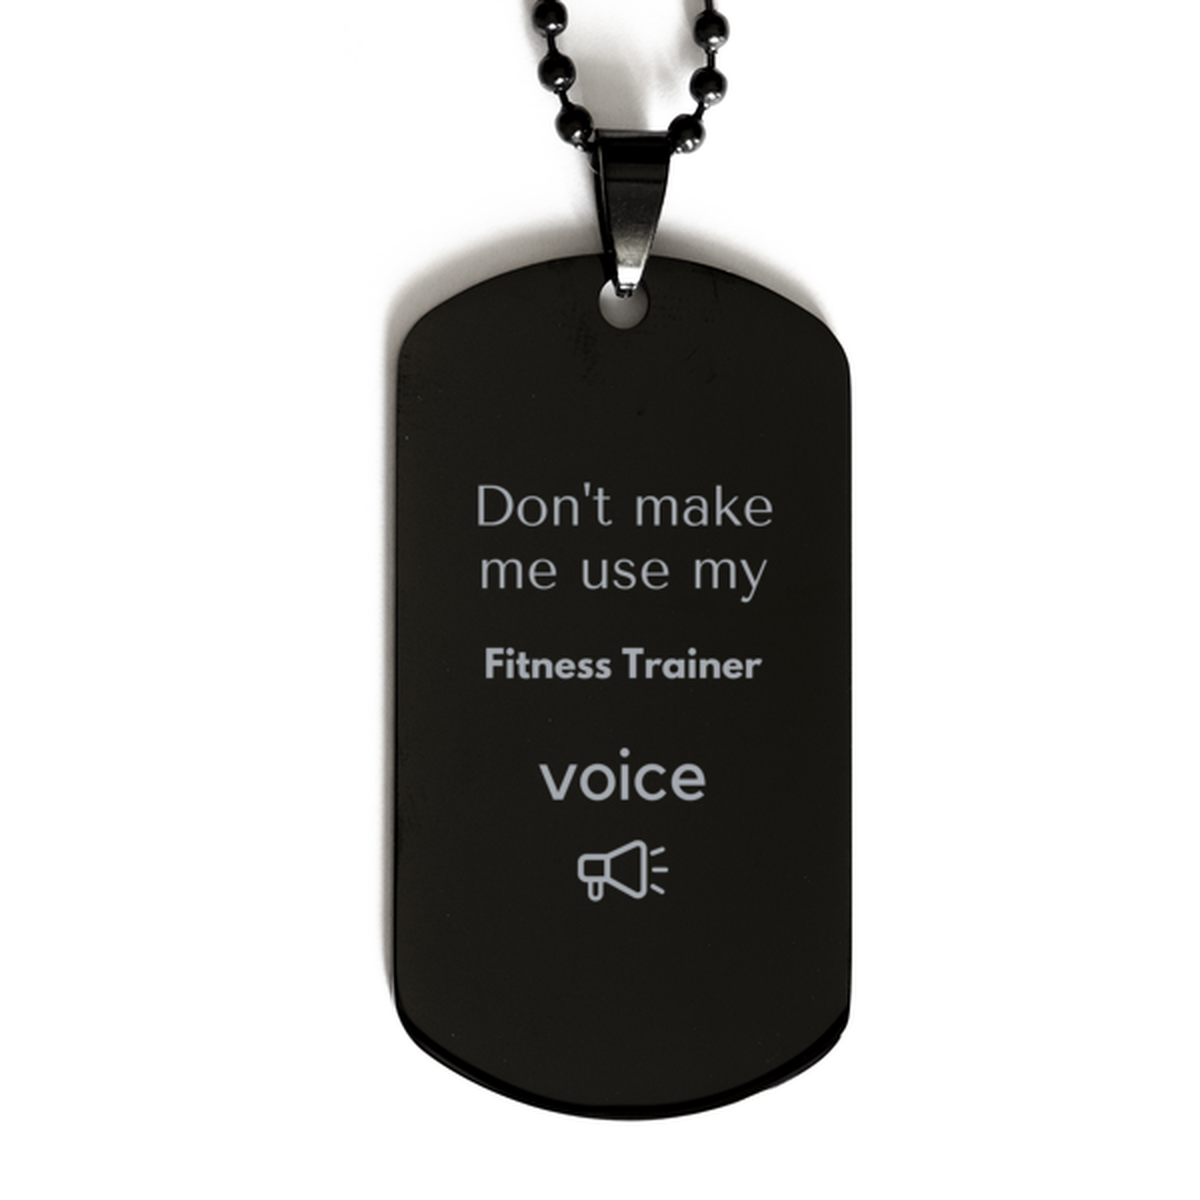 Don't make me use my Fitness Trainer voice, Sarcasm Fitness Trainer Gifts, Christmas Fitness Trainer Black Dog Tag Birthday Unique Gifts For Fitness Trainer Coworkers, Men, Women, Colleague, Friends